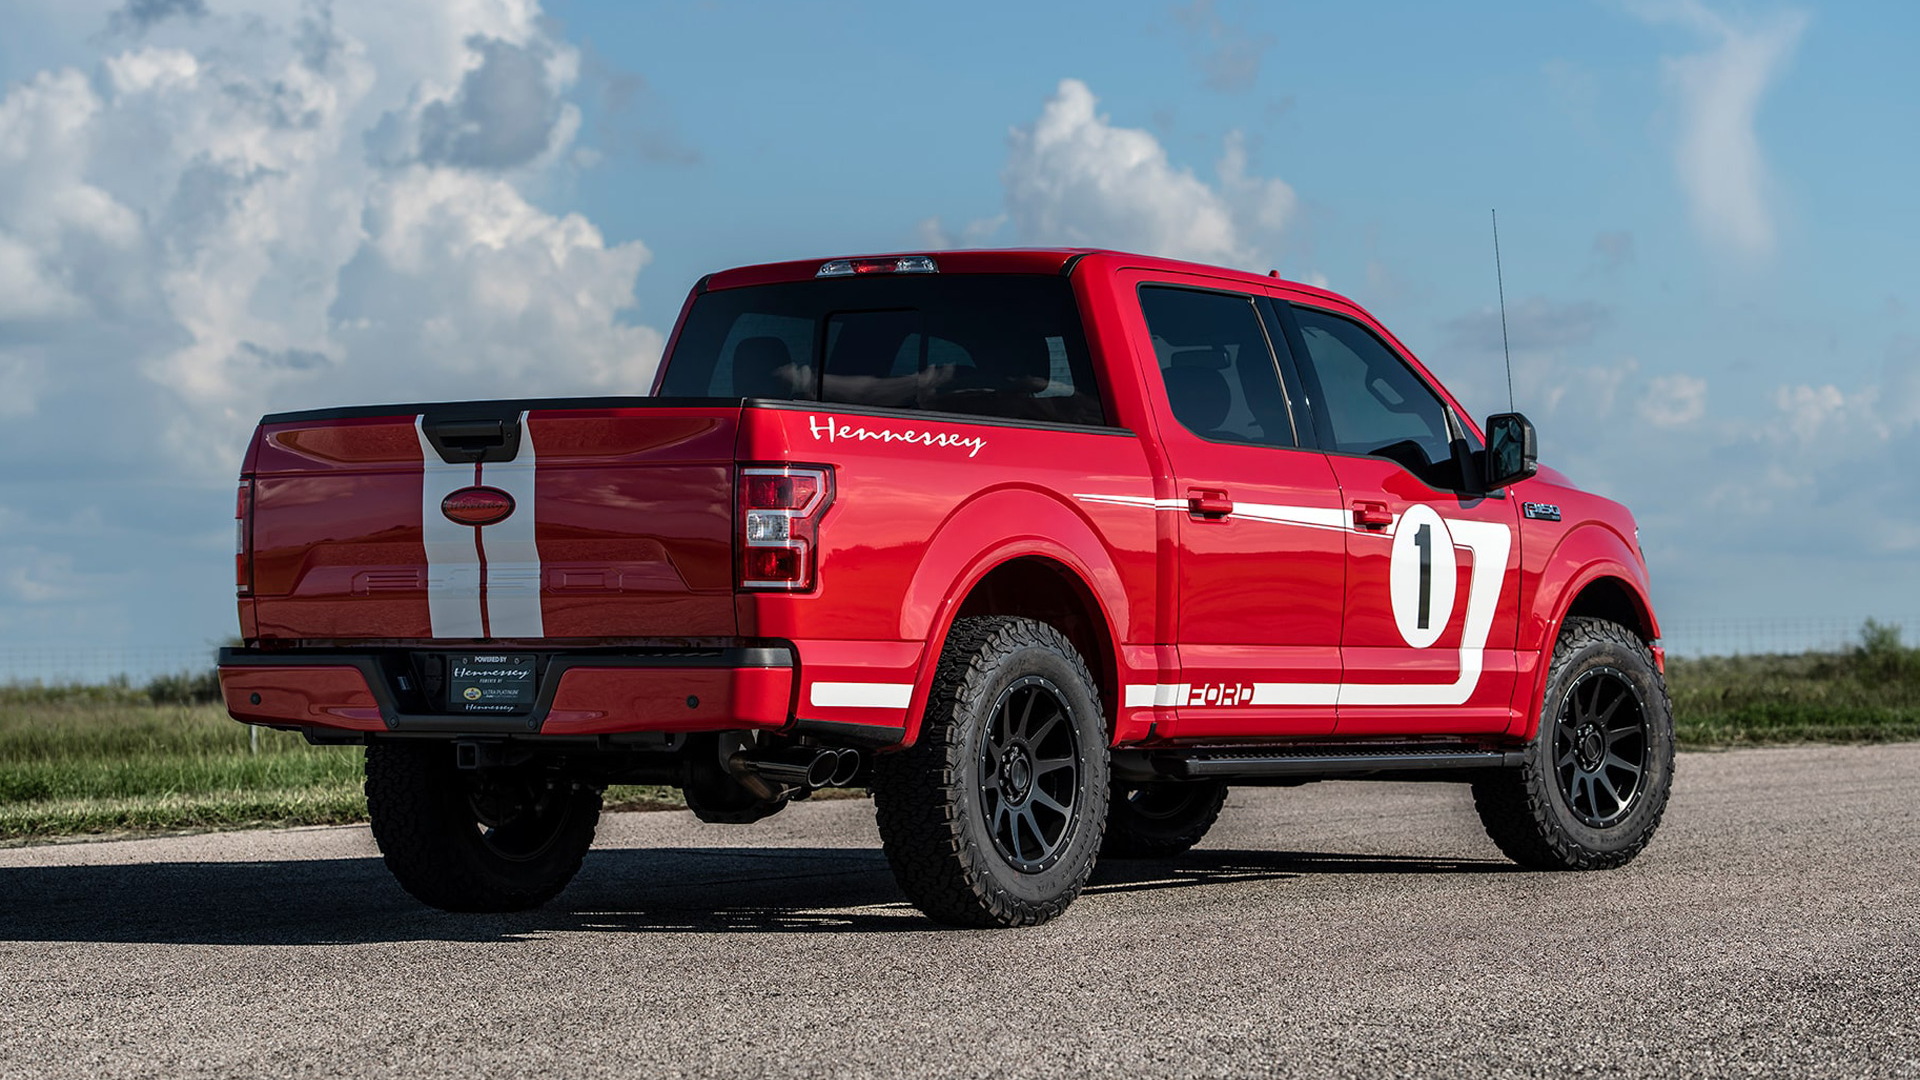 2019 Hennessey Heritage Edition Ford F-150